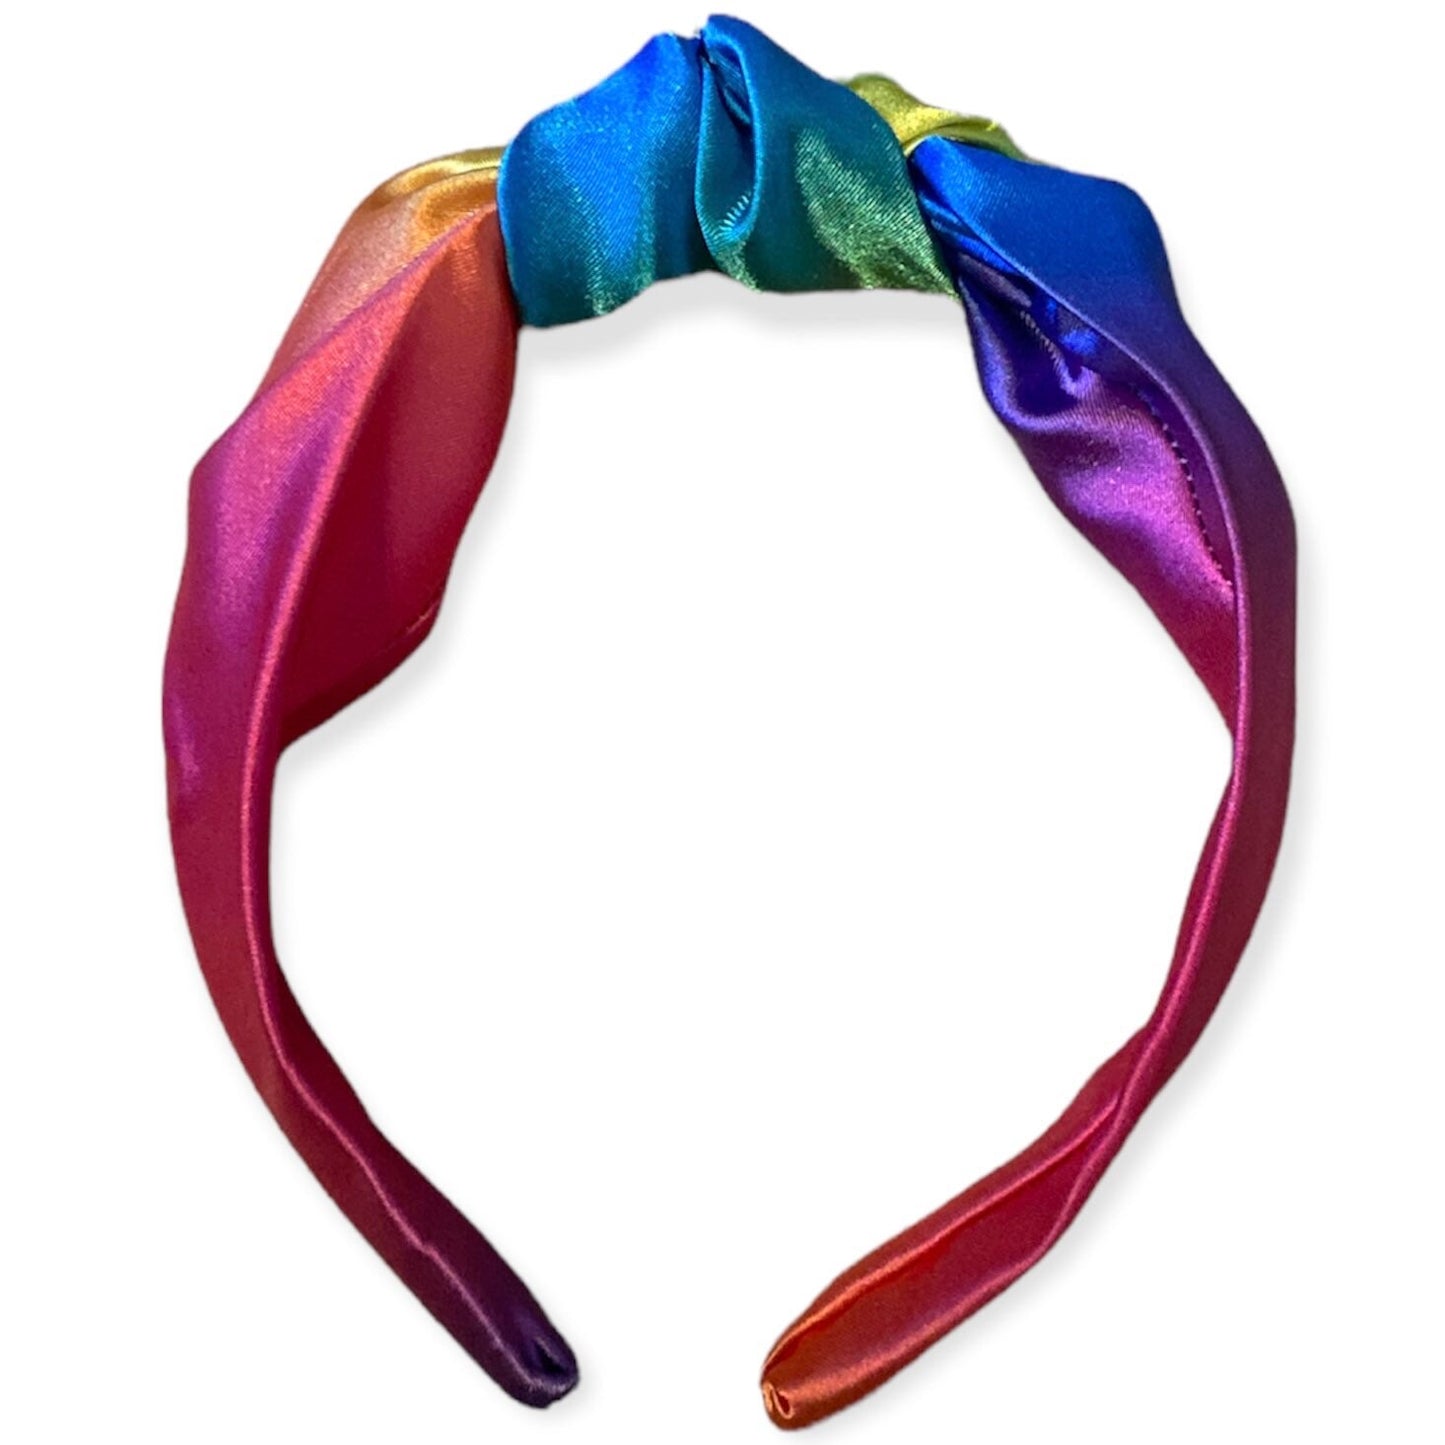 Rainbow satin knotted Alice band